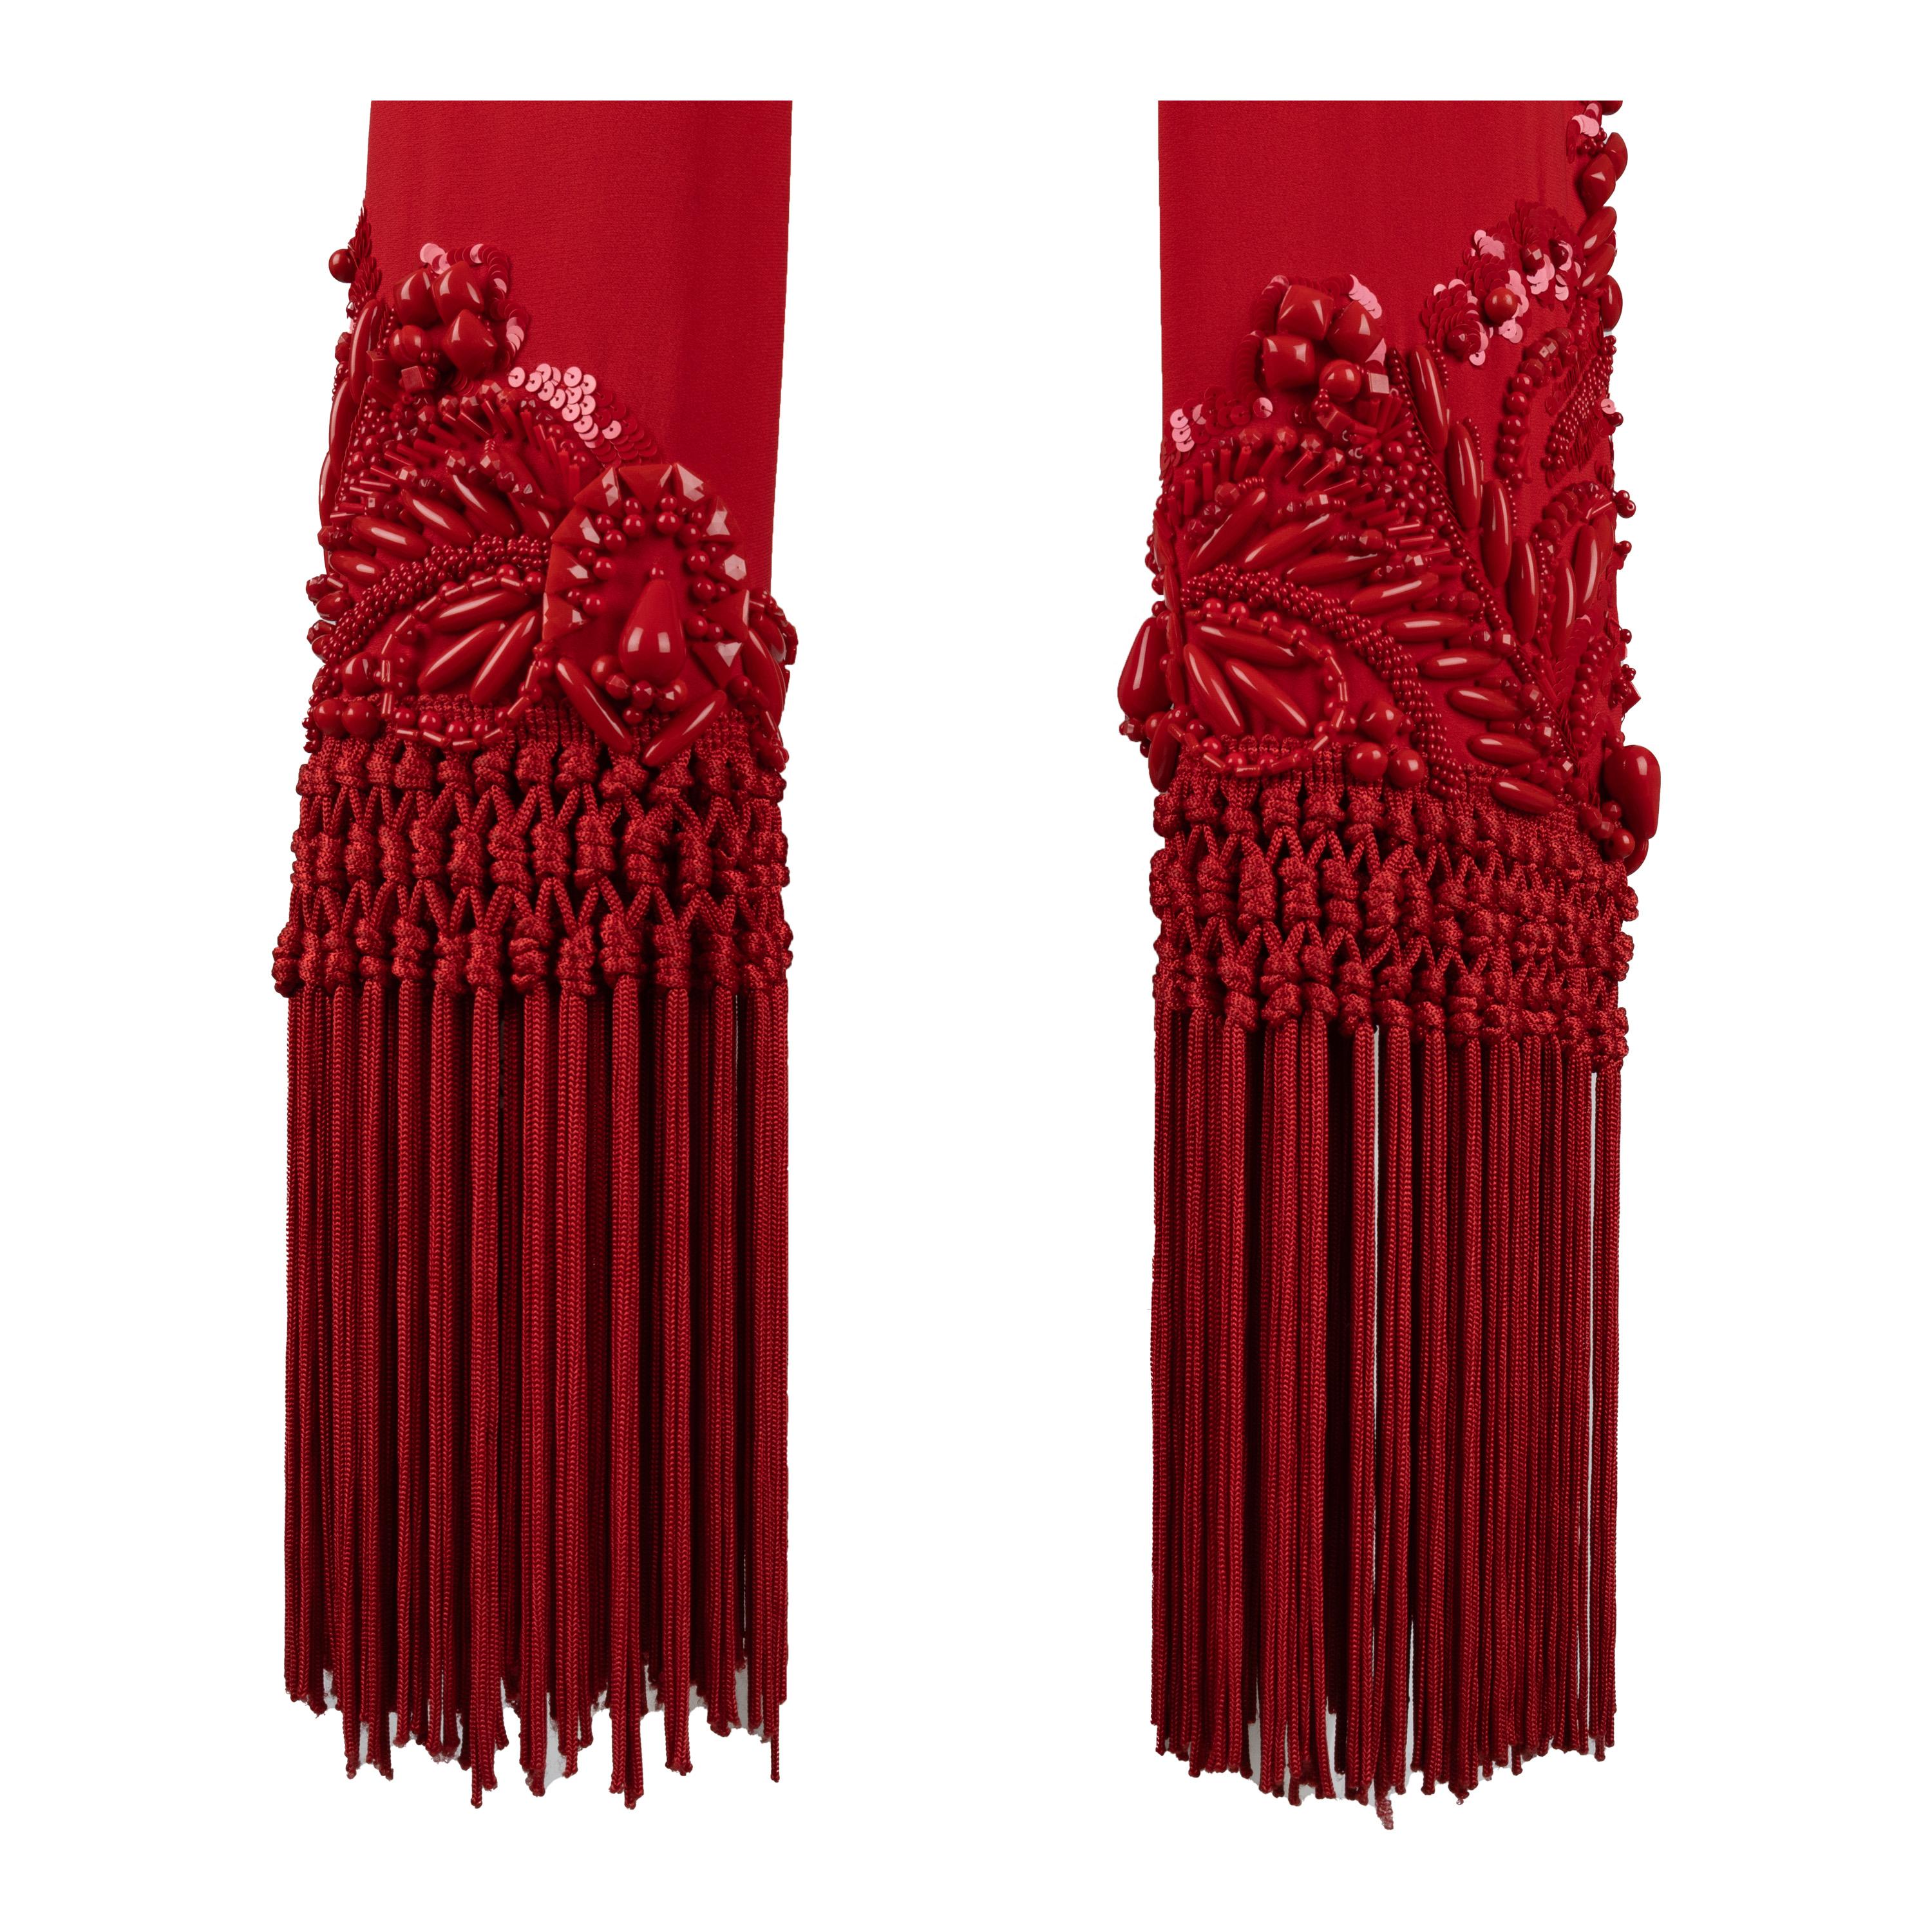 This Gianfranco Ferré scarf is the perfect blend of classic elegance and modern-day glamor. Made from a double-layered lightweight fabric in a vivid red, it is embellished with eye-catching heavy beads in intricate pattern, and long